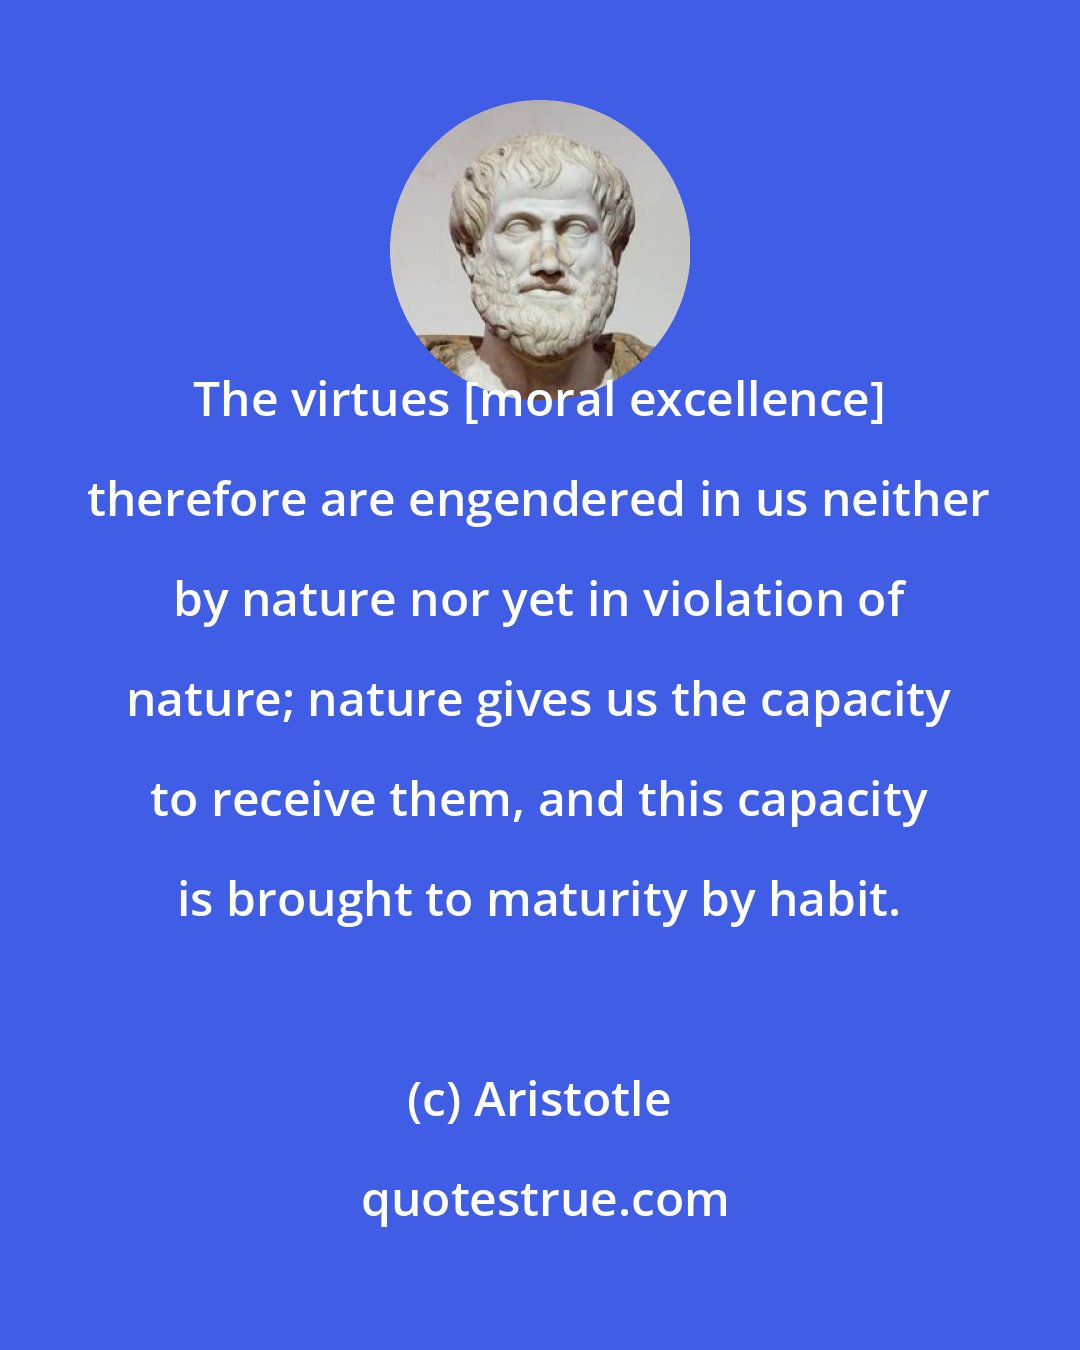 Aristotle: The virtues [moral excellence] therefore are engendered in us neither by nature nor yet in violation of nature; nature gives us the capacity to receive them, and this capacity is brought to maturity by habit.